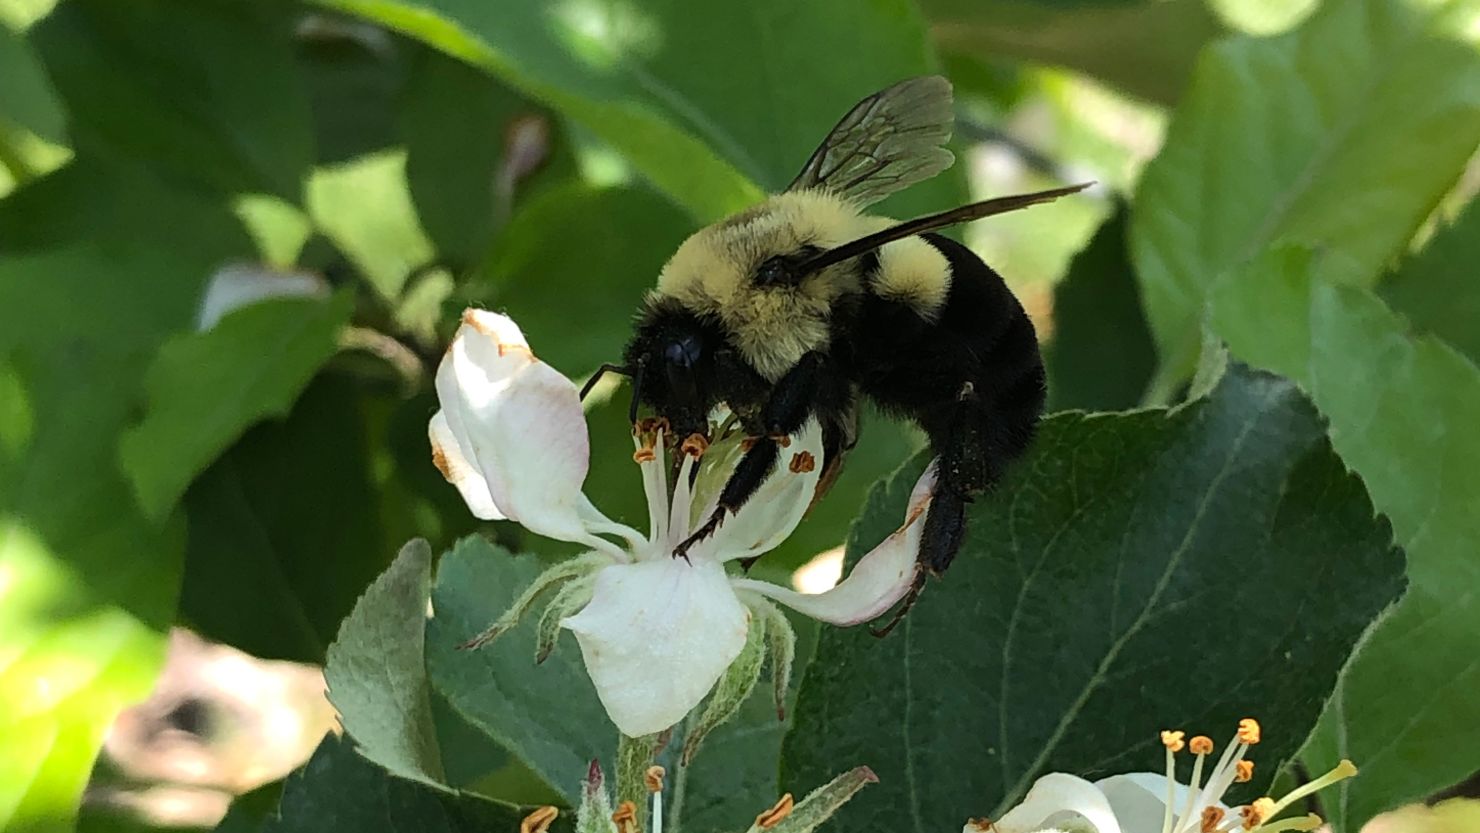 A common eastern bumblebee queen on apple blossom